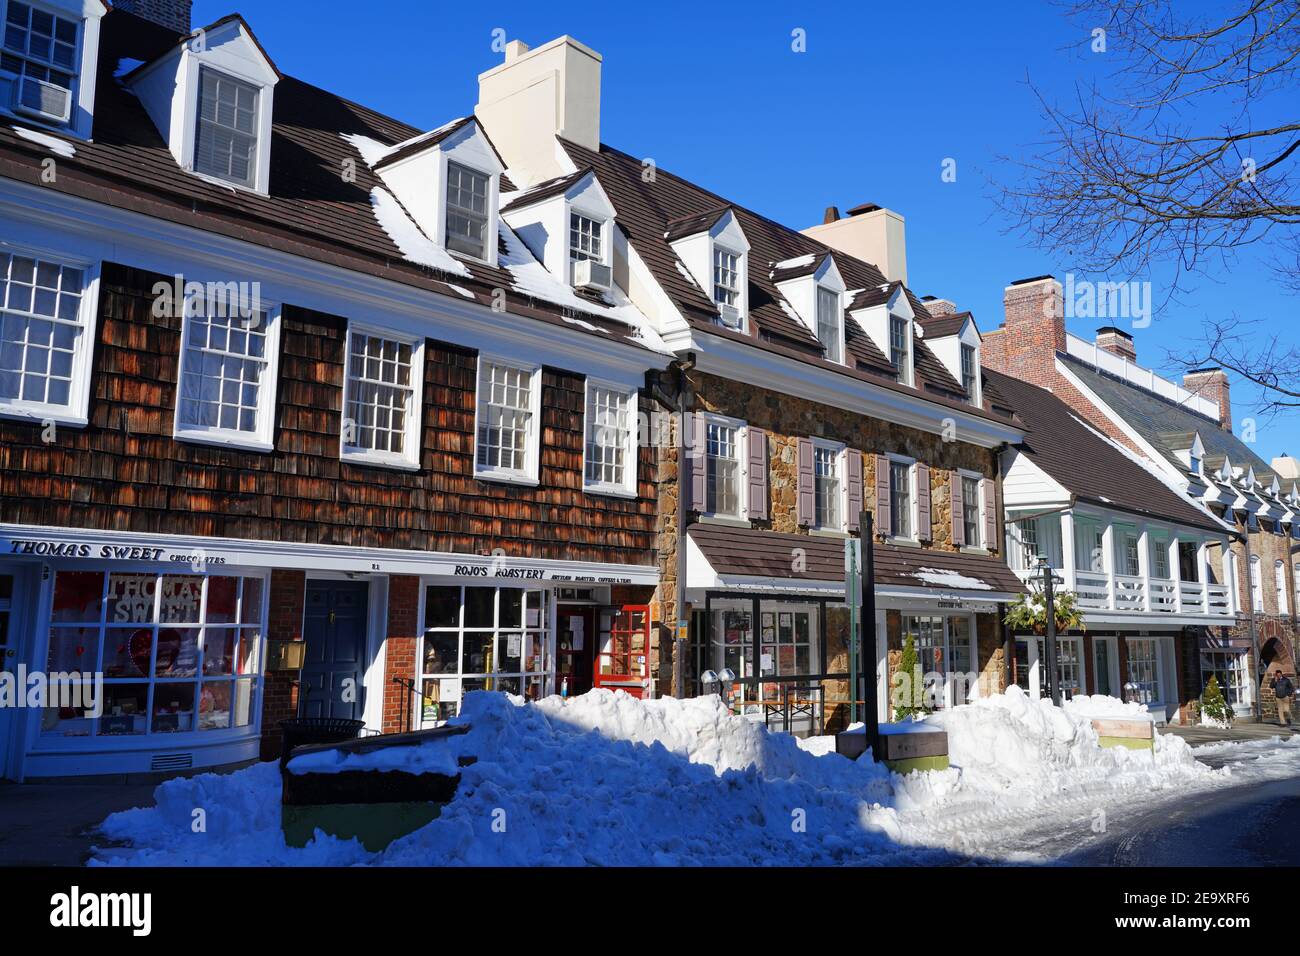 PRINCETON, NJ -4 FEB 2021- View of Palmer Square, a landmark square in downtown Princeton, New Jersey, United States, after a winter snow storm. Stock Photo